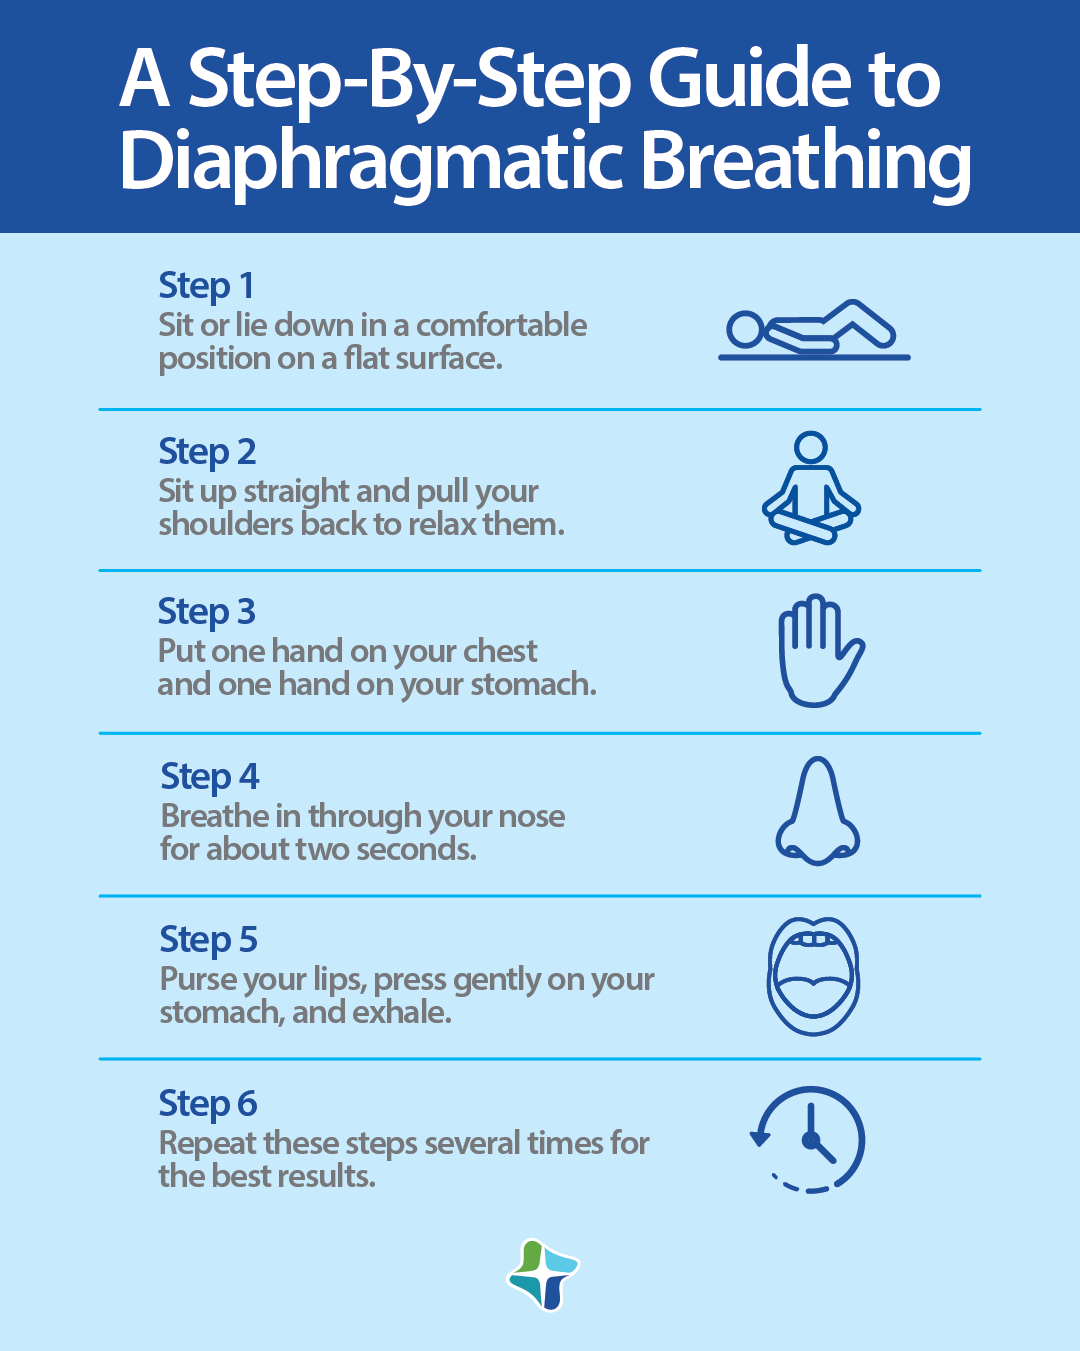 Infographic outlining the steps of diaphragmatic breathing, making sure your stomach moves in and out while your chest remains still.